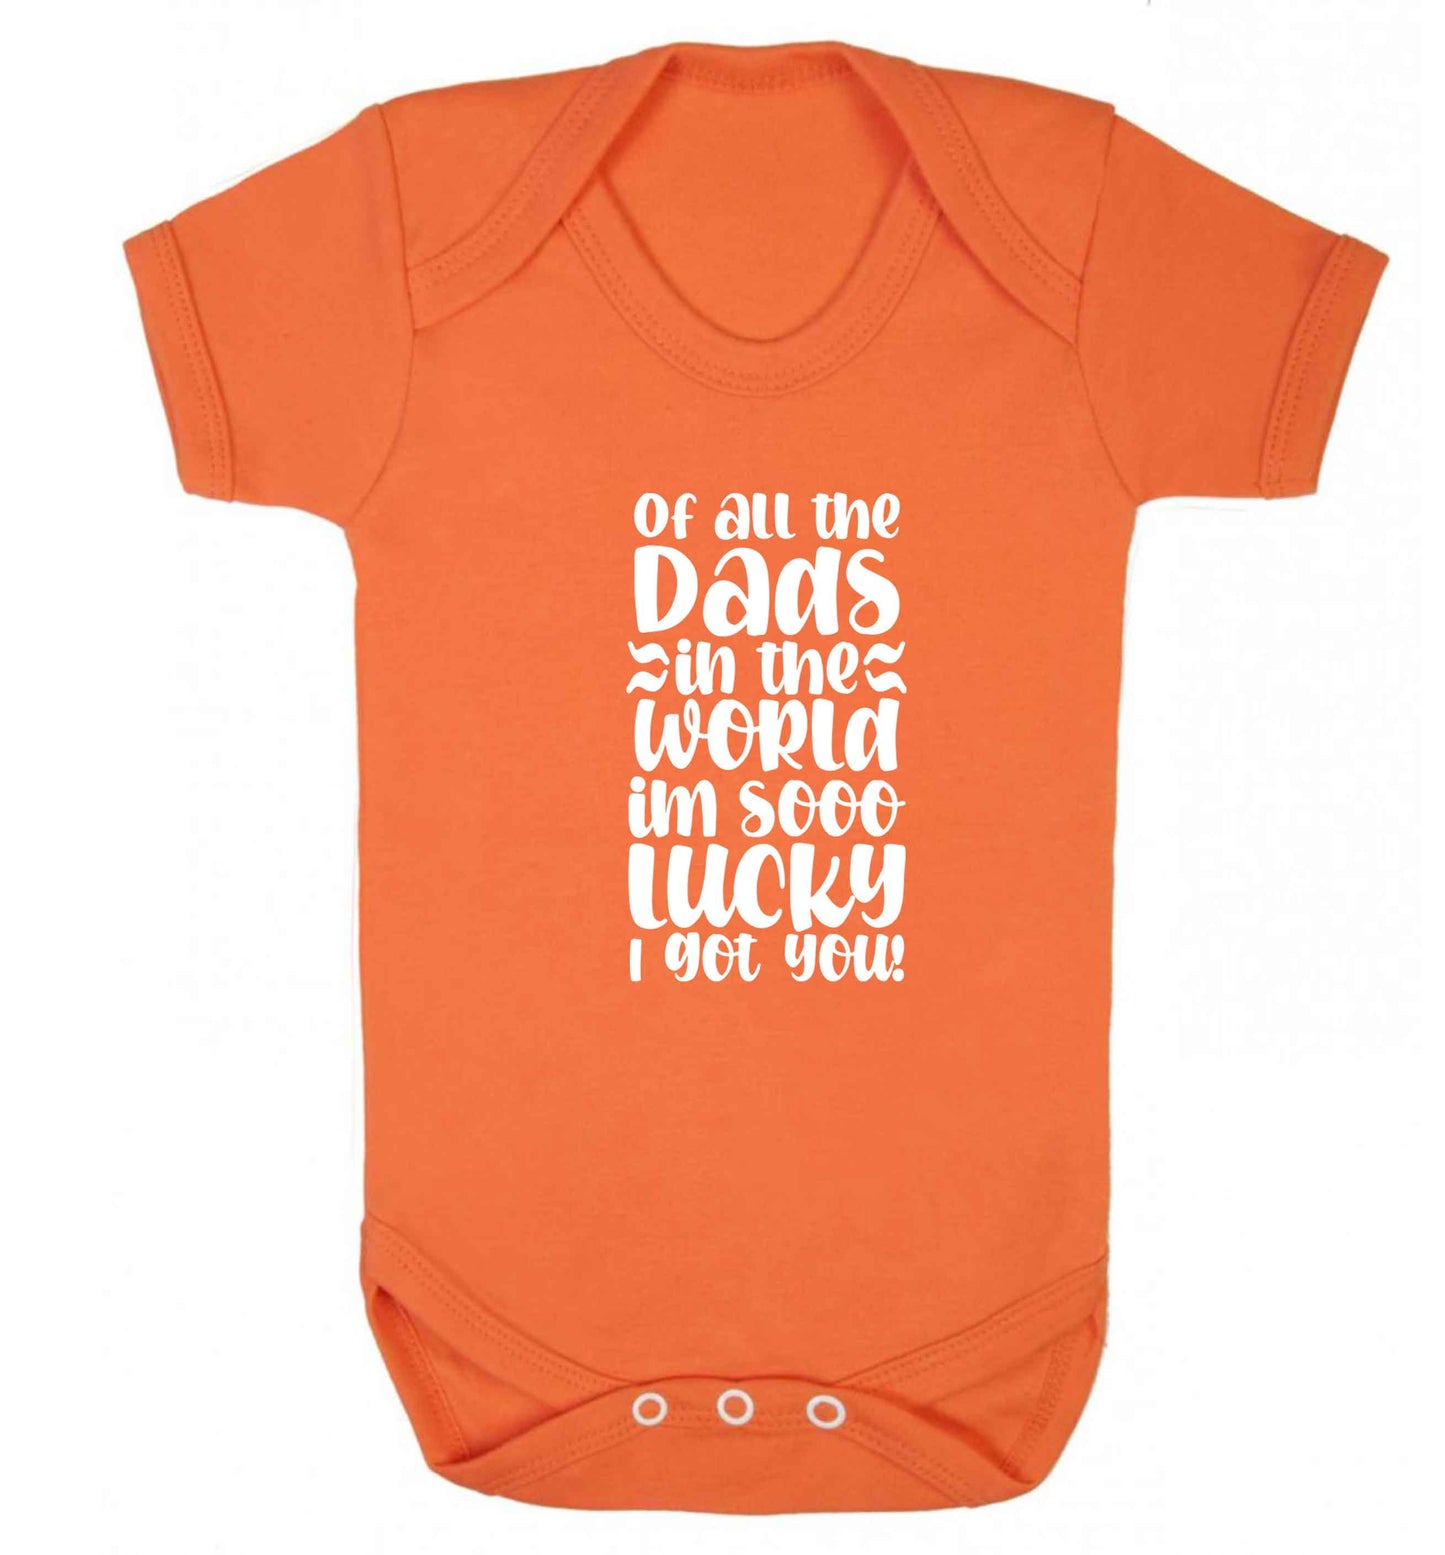 I'm as lucky as can be the worlds greatest dad belongs to me! baby vest orange 18-24 months